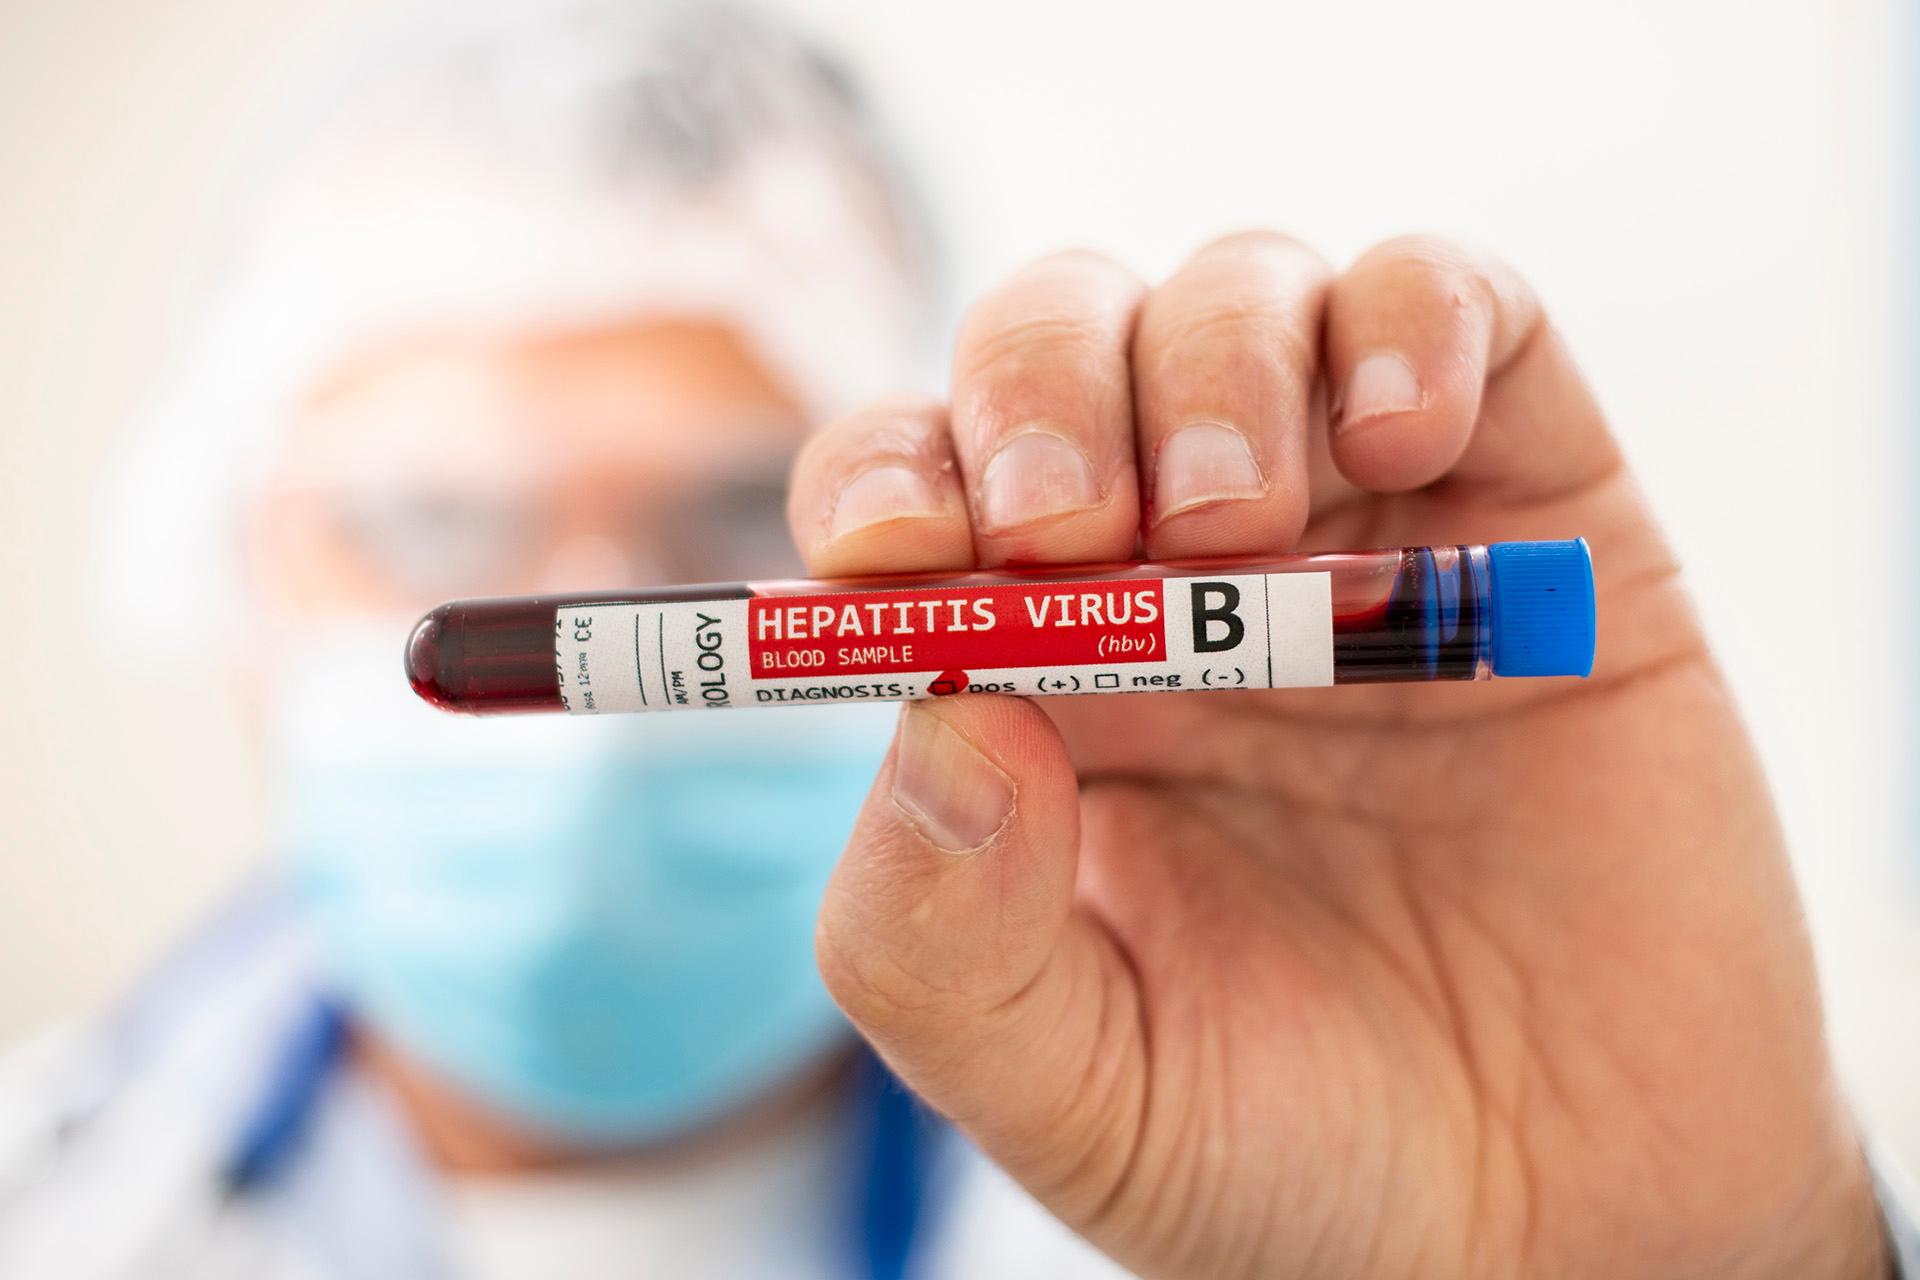 Why Do We Celebrate 28 July as World Hepatitis Day?